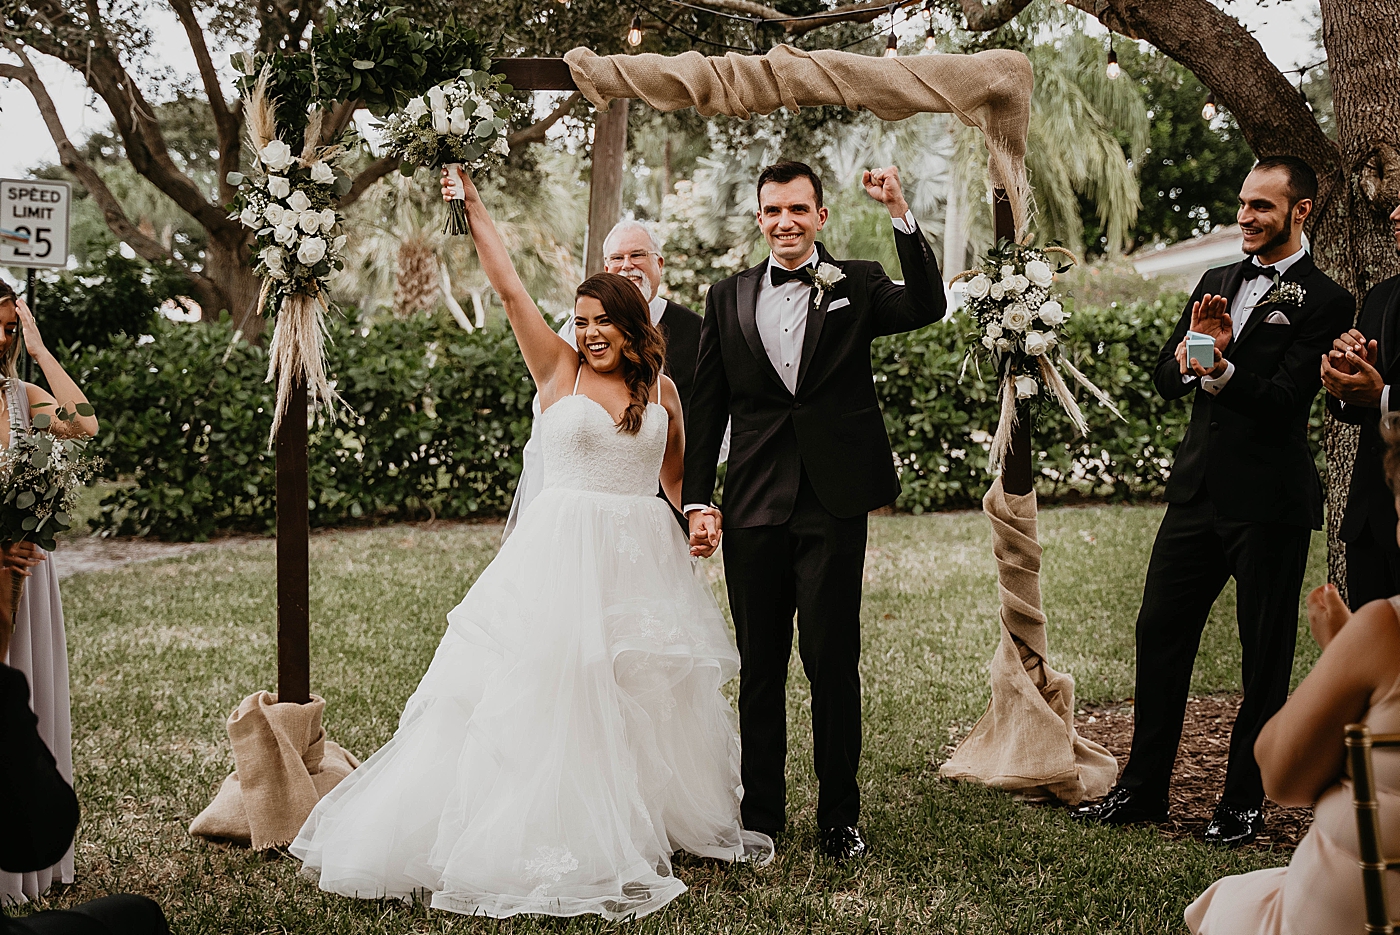 Triumphant pose going down aisle Intimate South Florida Wedding Photography captured by Wedding Photographer Krystal Capone Photography